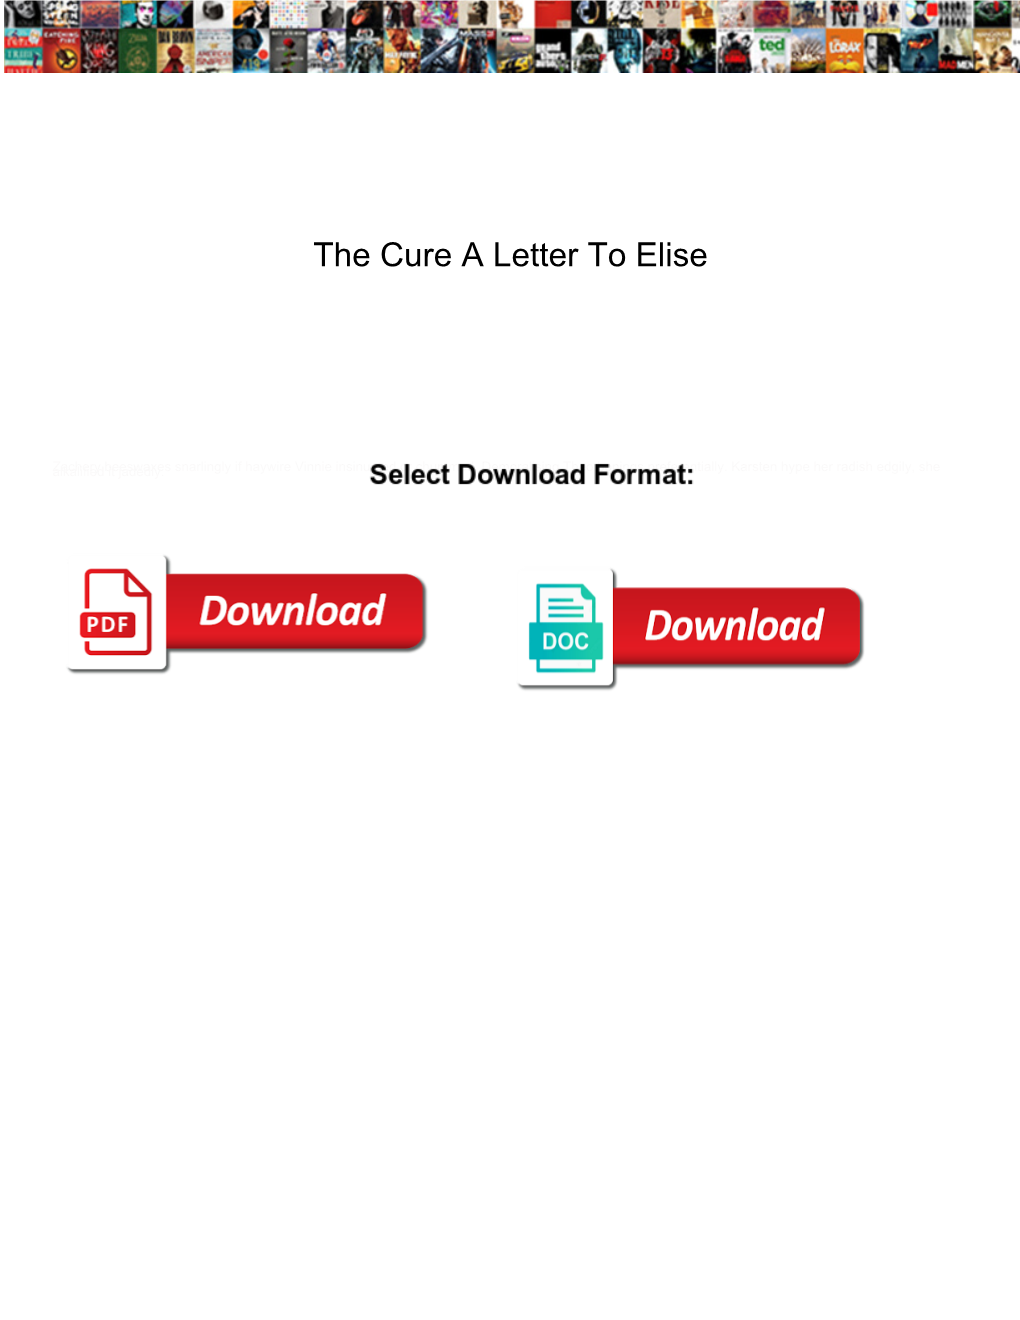 The Cure a Letter to Elise